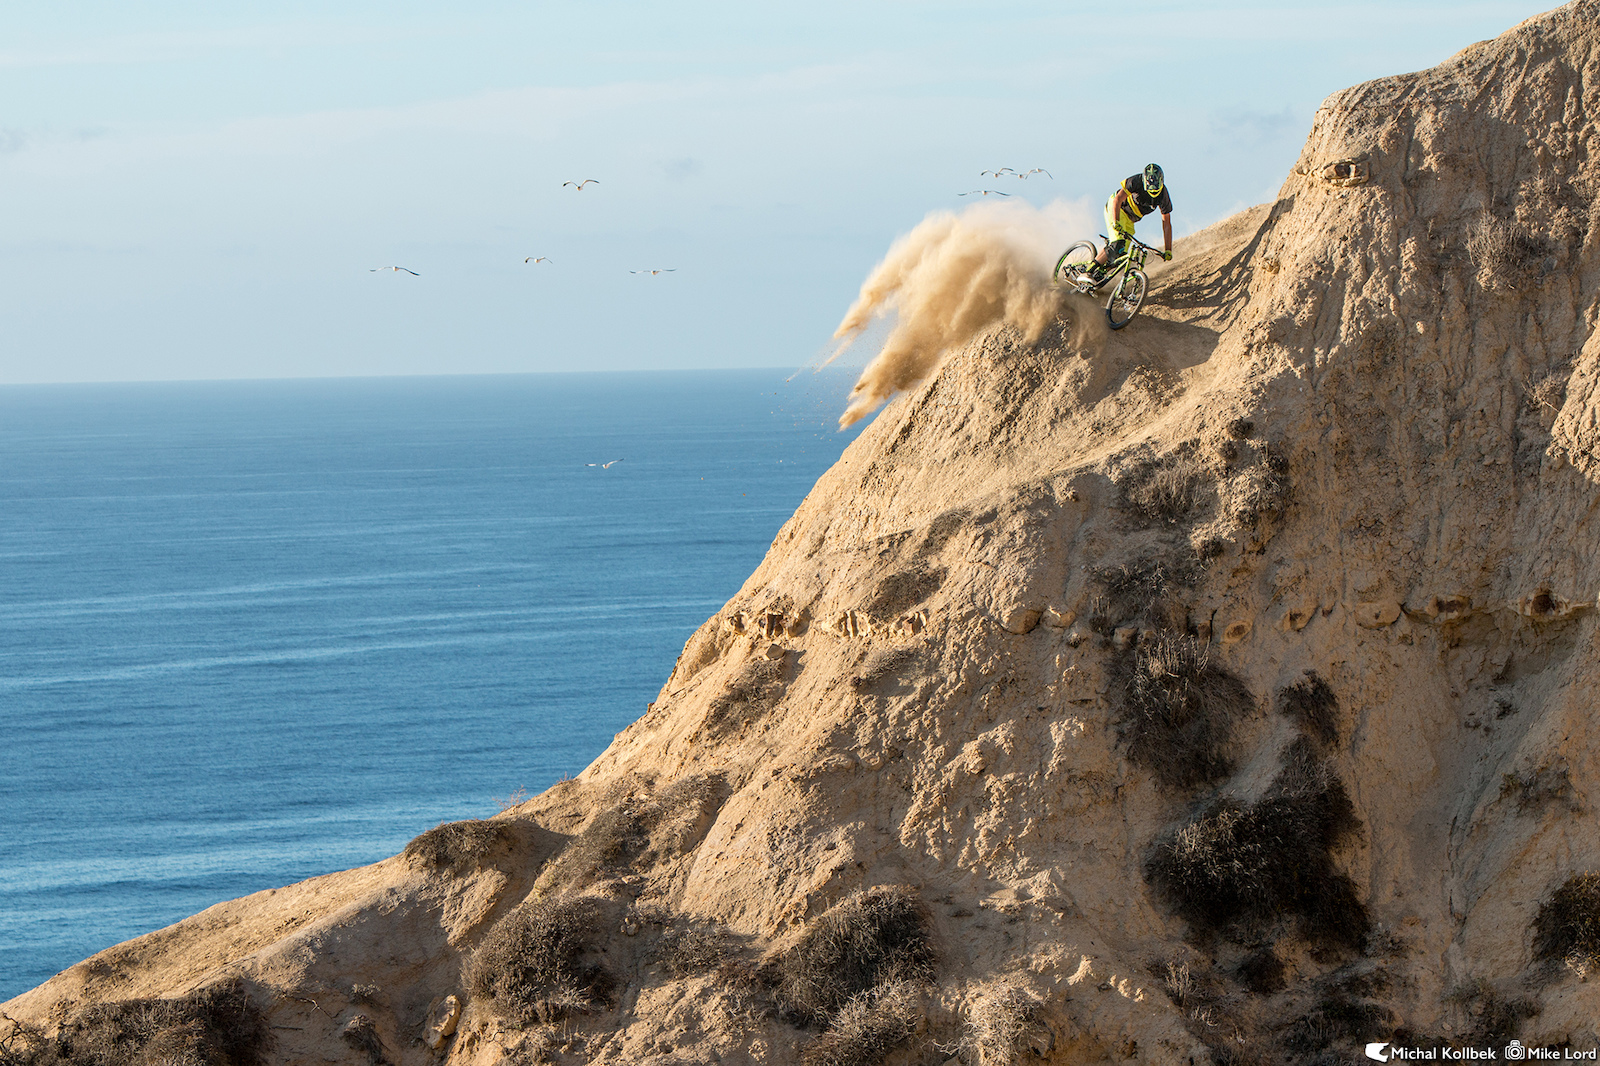 Only in California can you ride in shorts and t-shirt during winter! DVO Suspension Team Rider Michal Kollbek taking advantage of the awesome weather by berm blasting by the ocean.

Follow us on Instagram!
@kollbi - Rider
@energyjunkie - Photographer